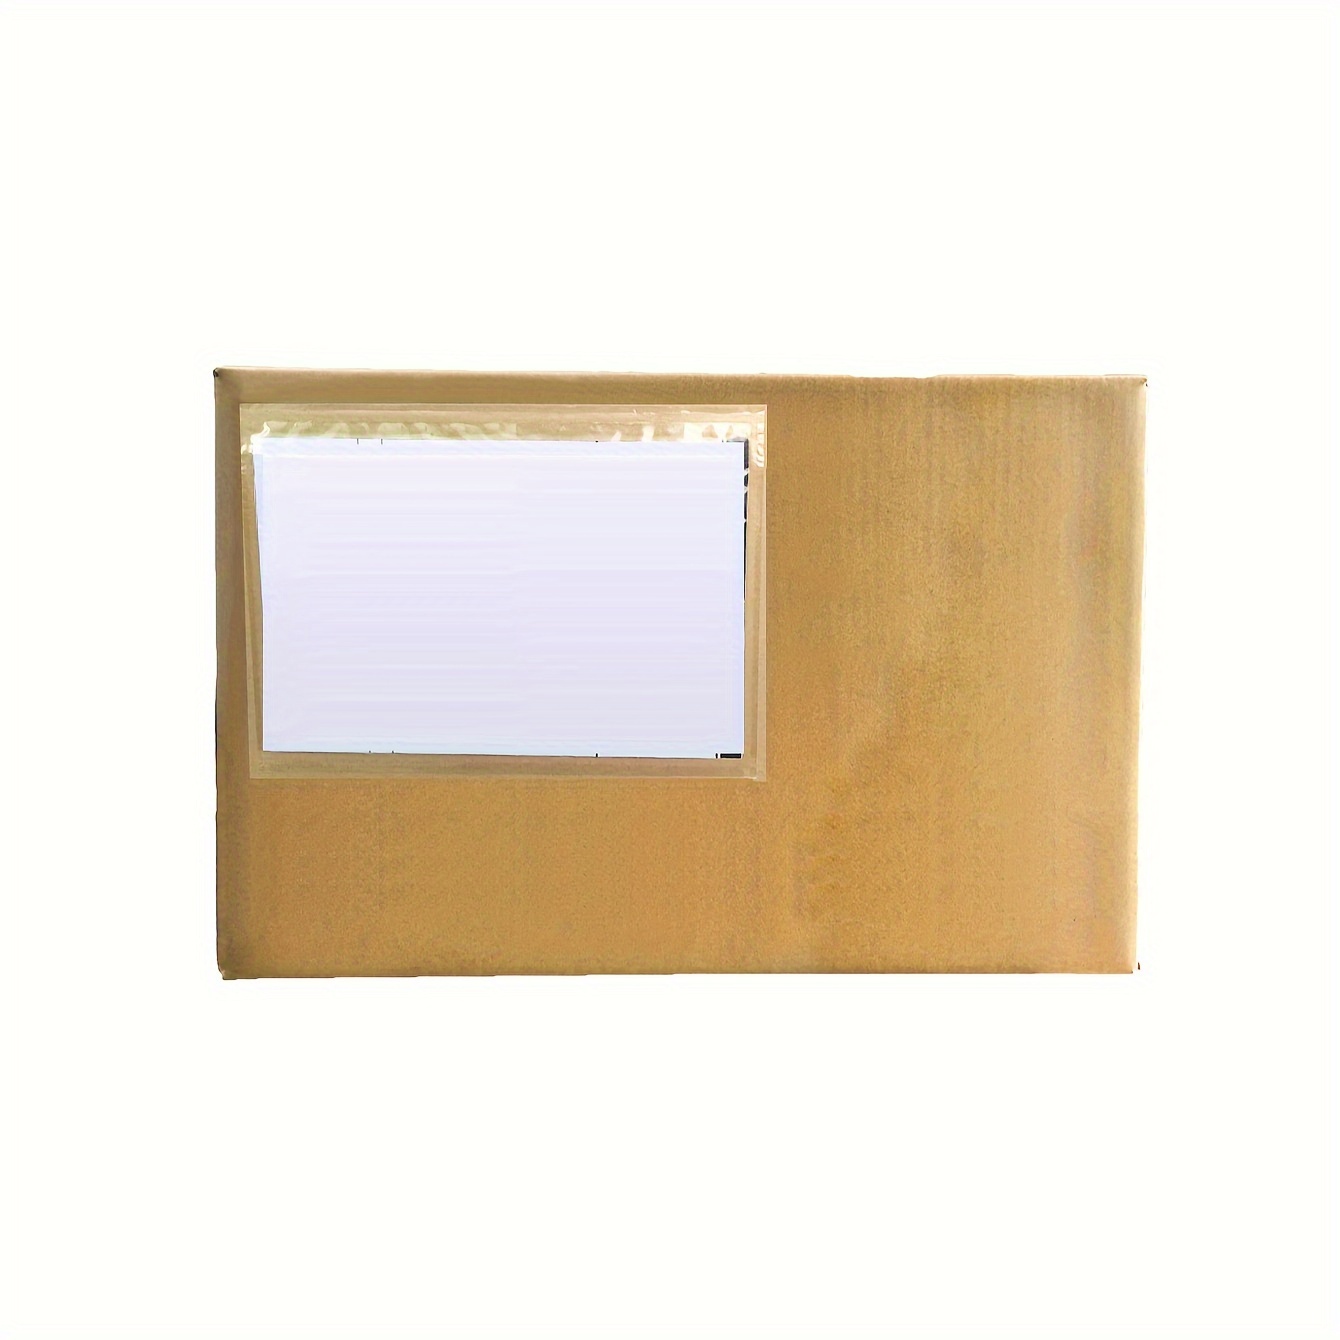  100 Pack Top Load 4x6 Photo Sleeves with Adhesive